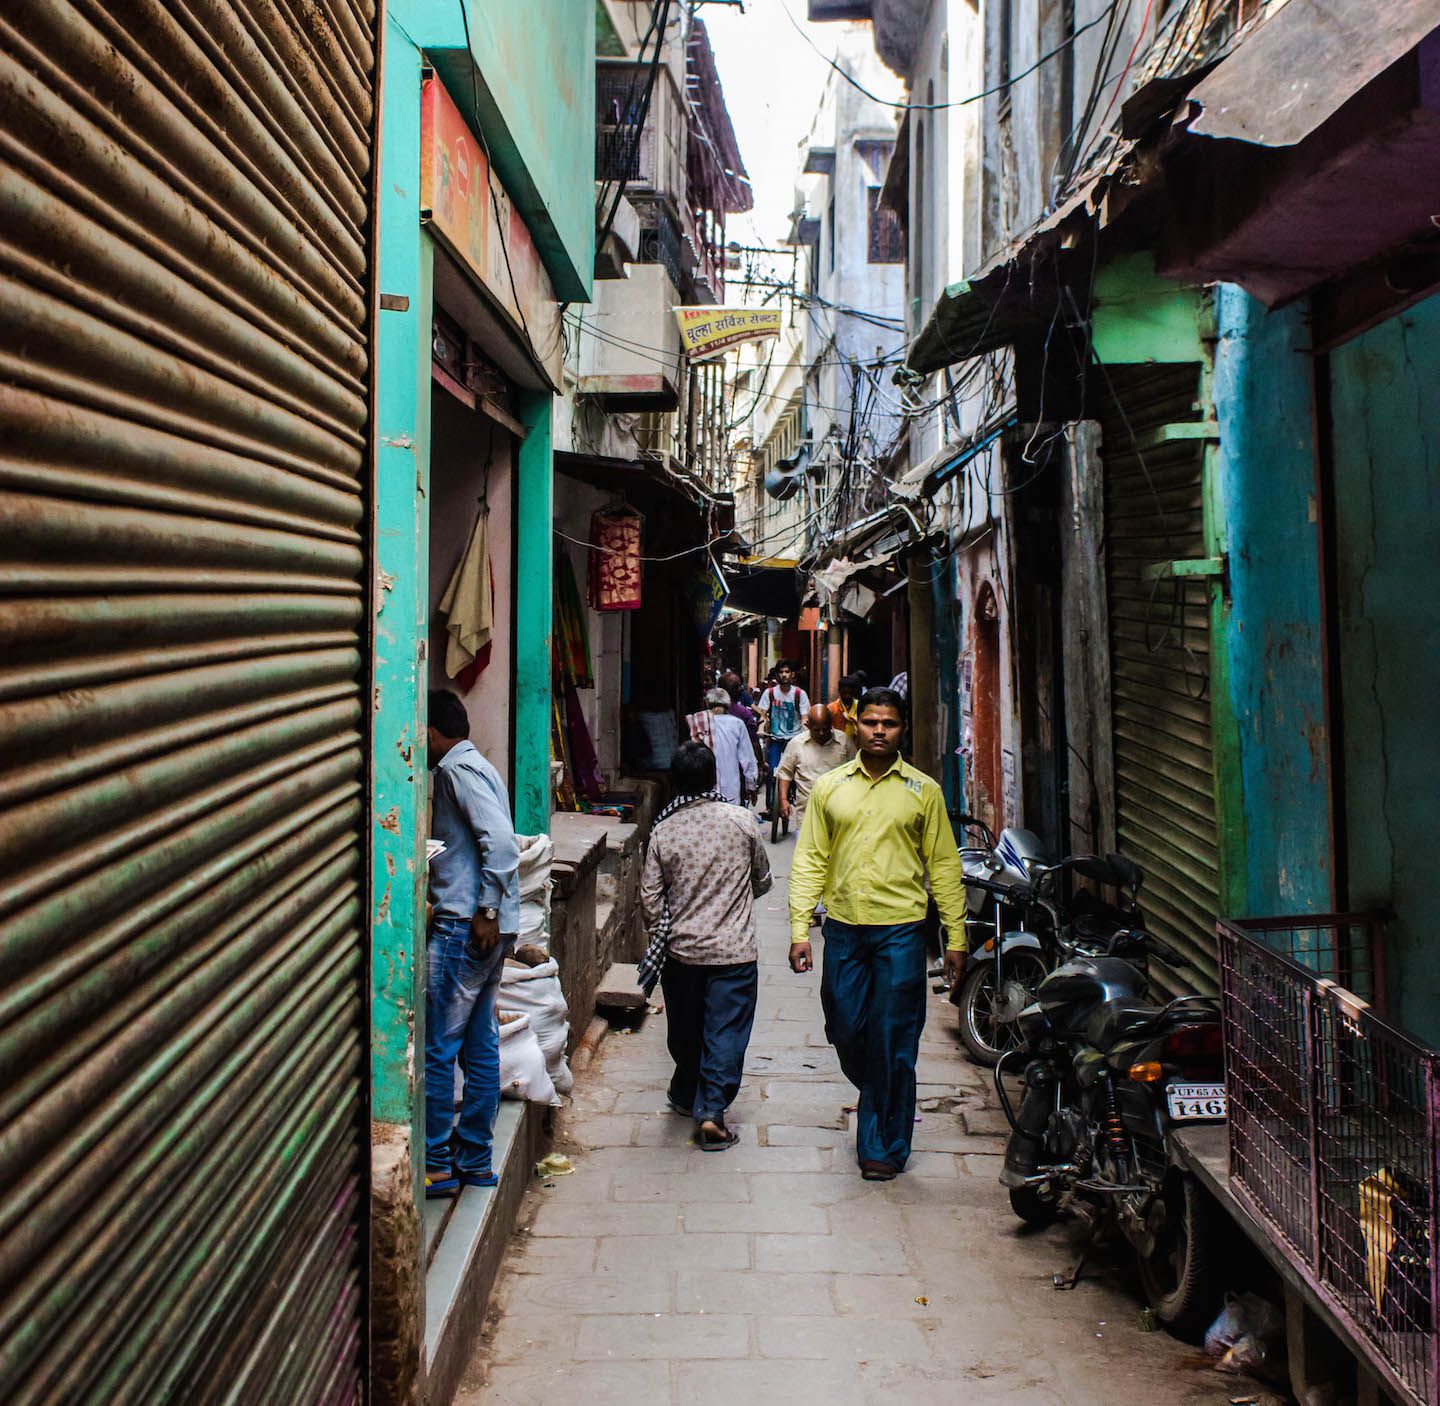 View of the alleys in Varanasi, India